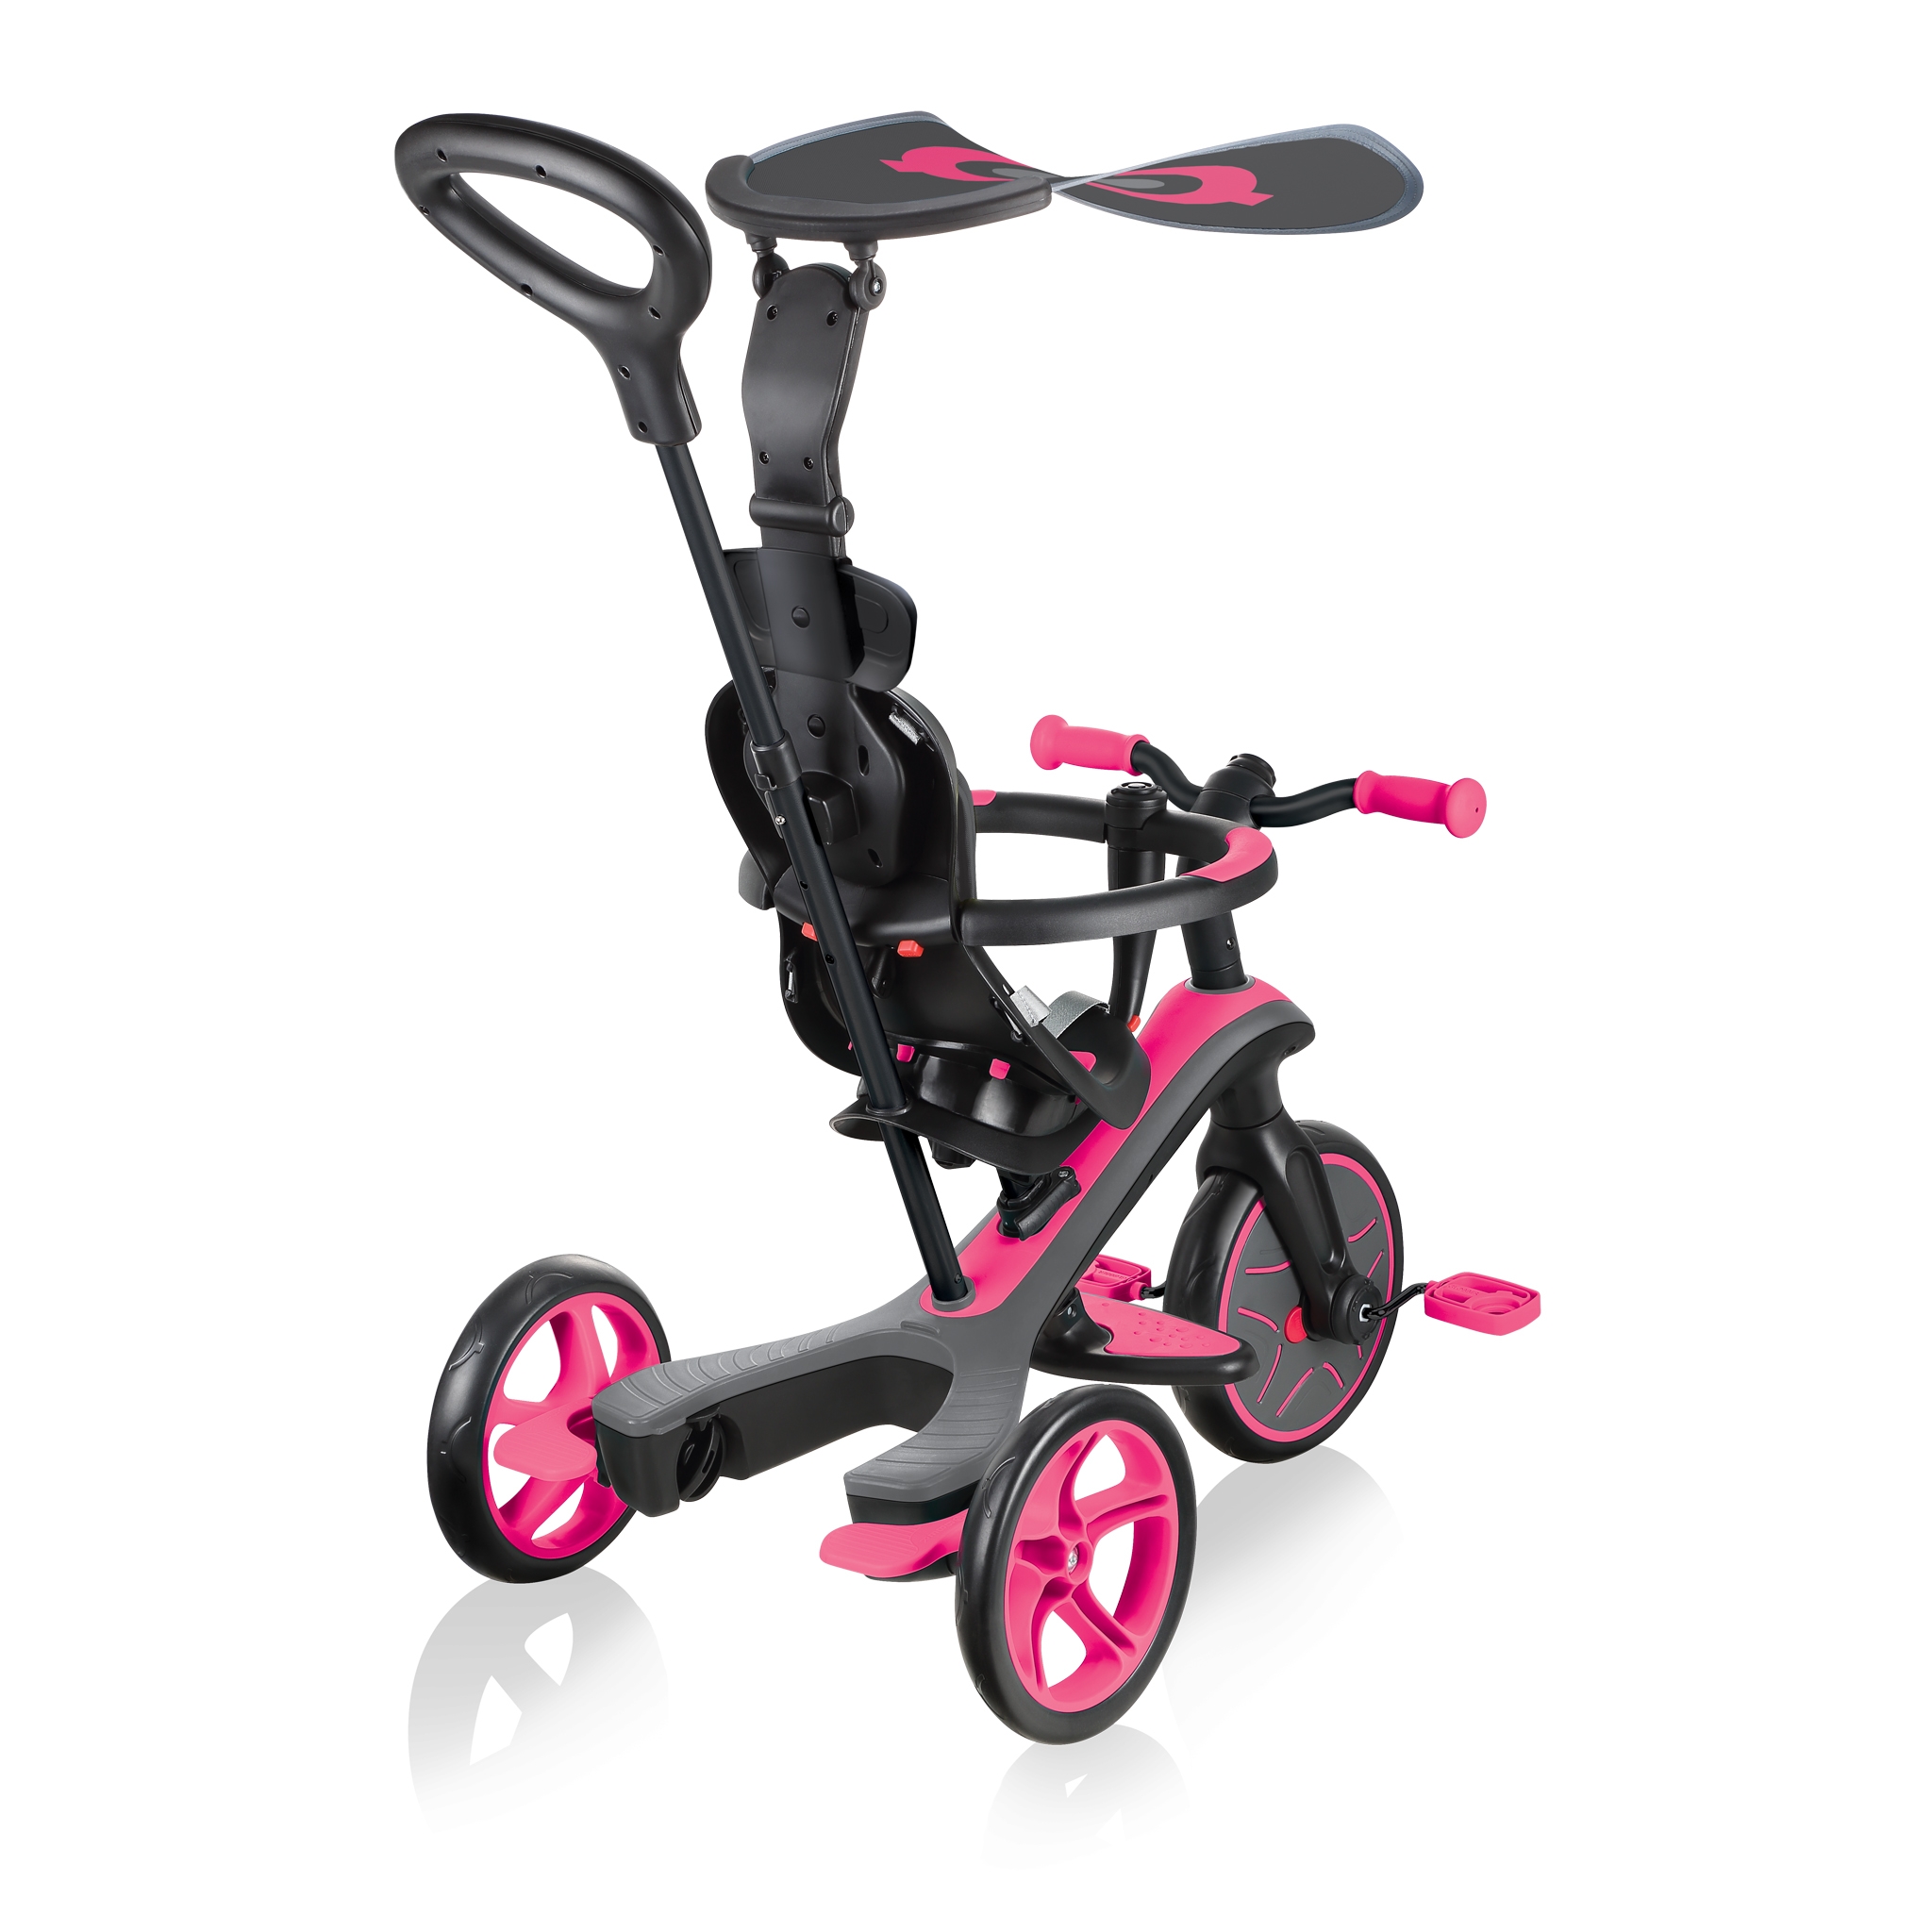 Globber-EXPLORER-TRIKE-4in1-all-in-one-baby-tricycle-and-kids-balance-bike-stage1-infant-trike 6